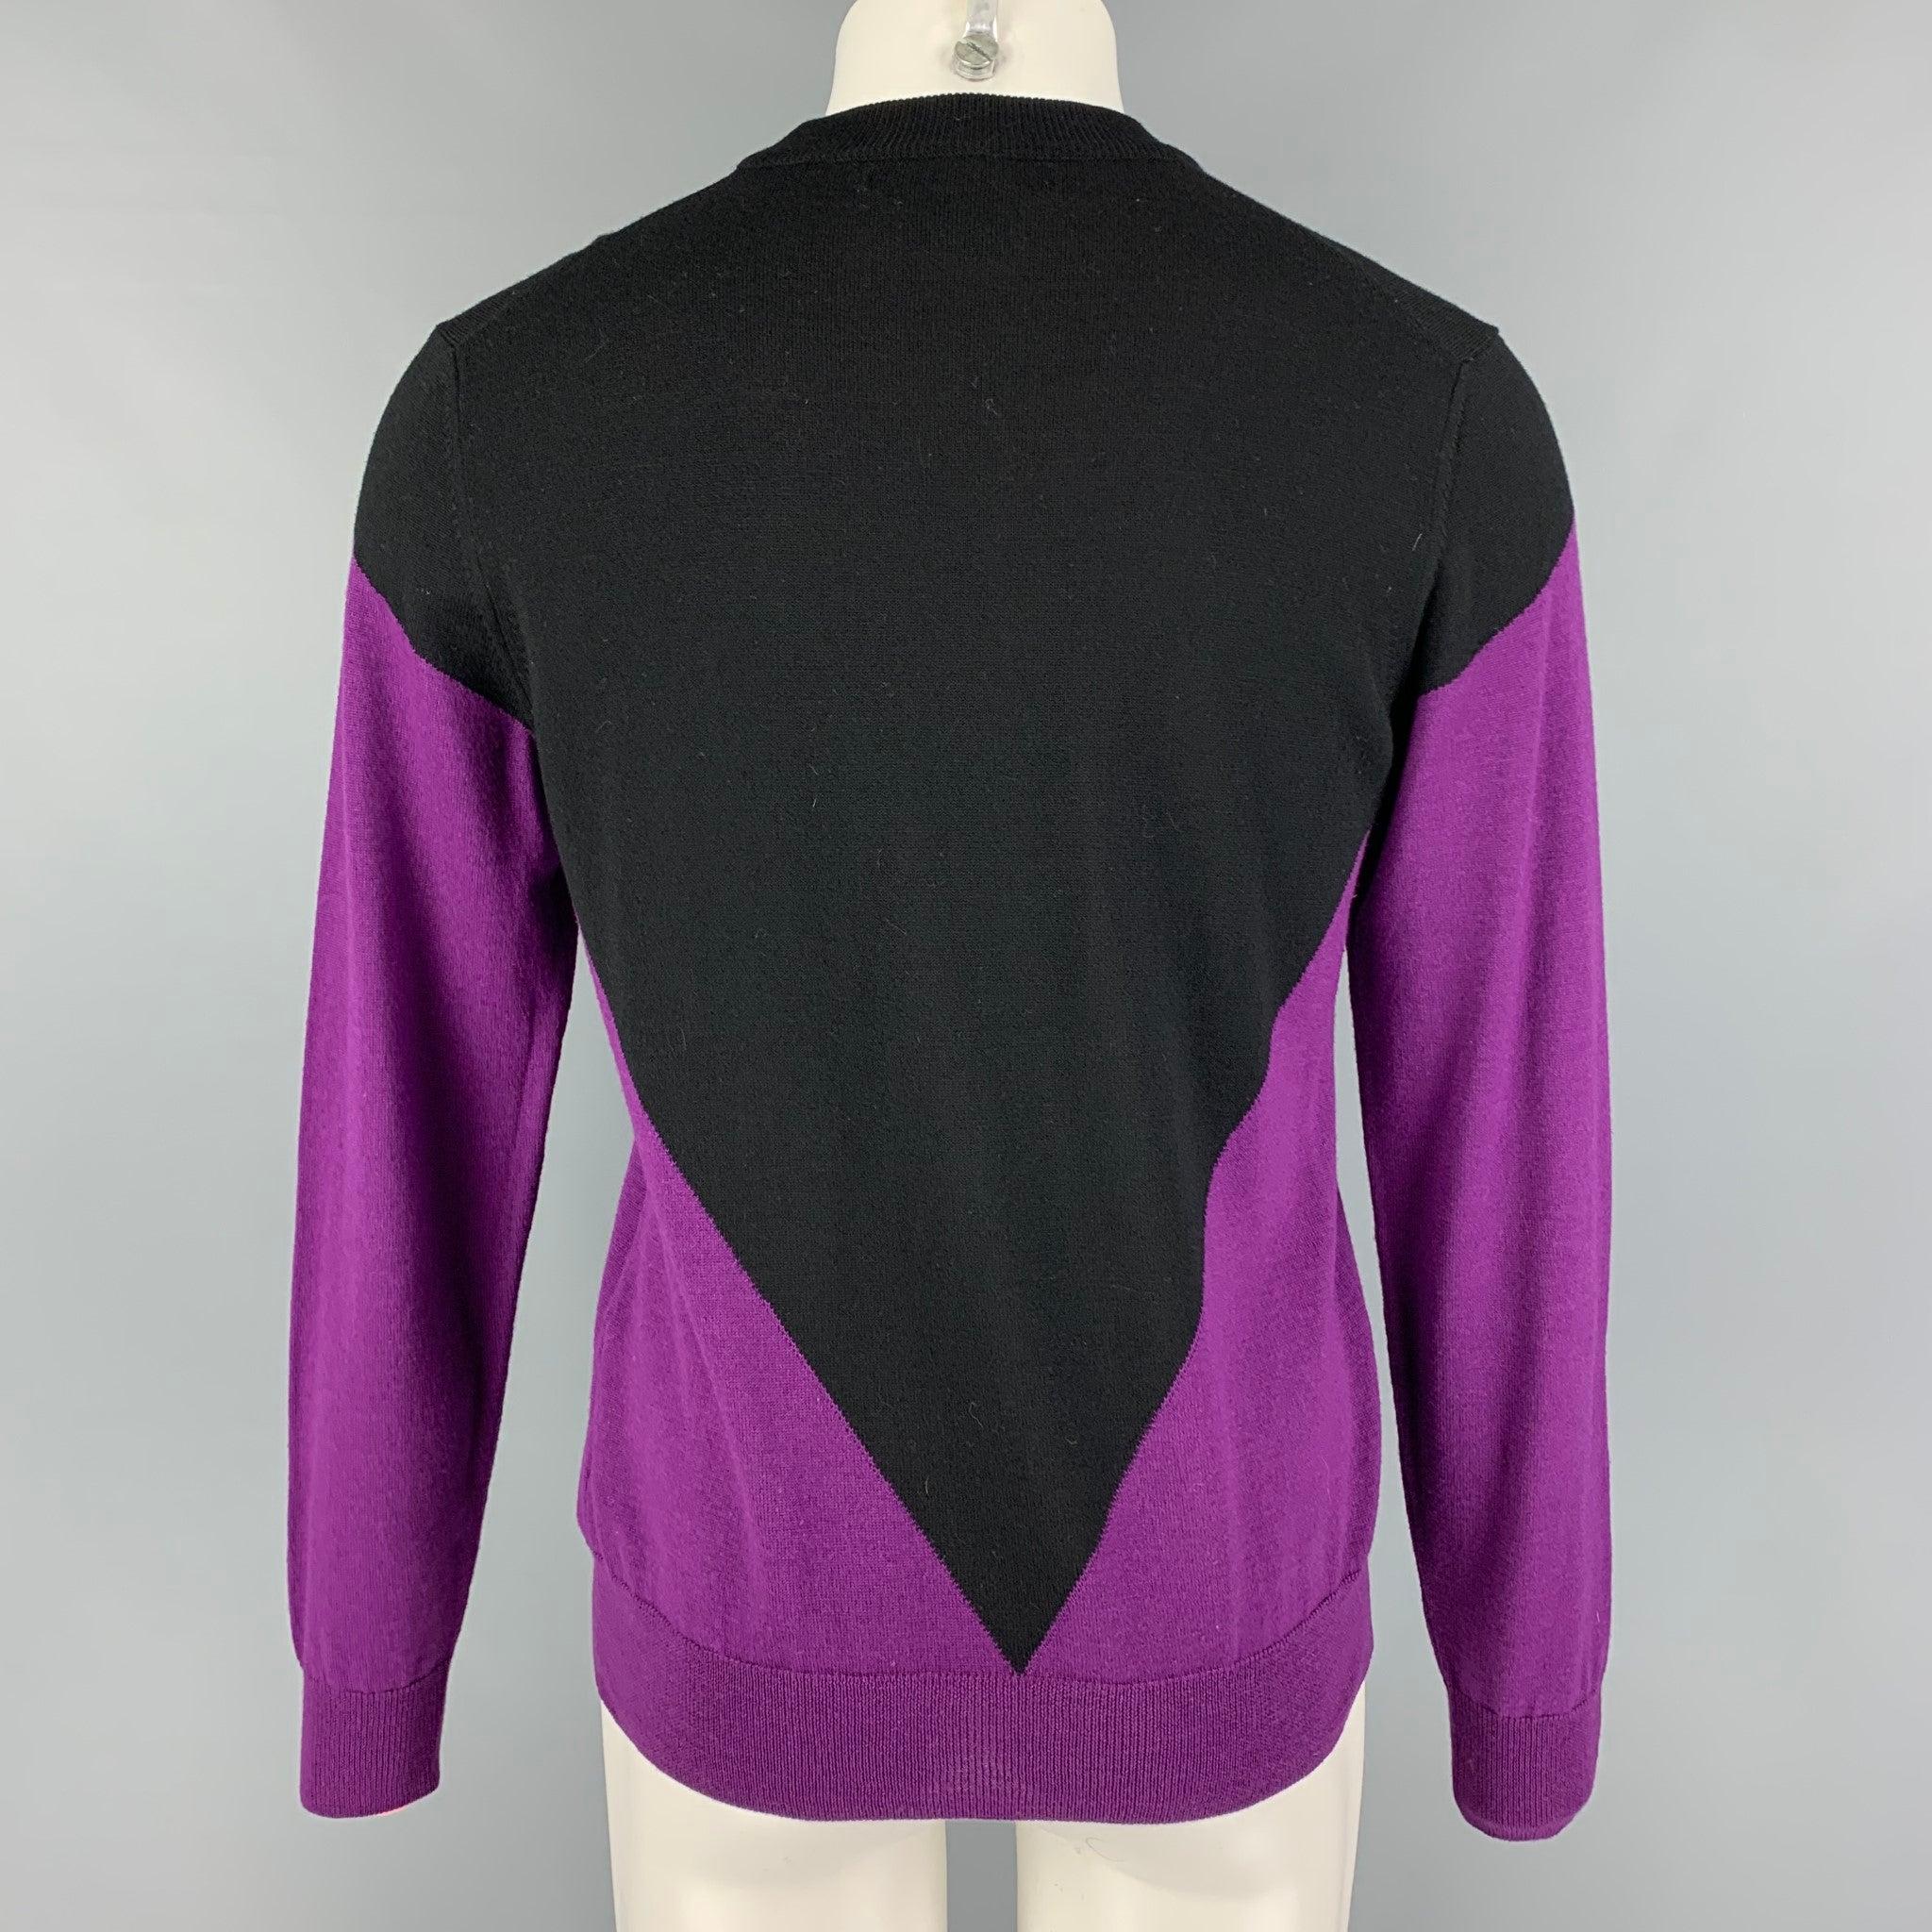 VETEMENTS x COMME des GARCONS SHIRT SS17 Size M Purple Wool Crew-Neck Pullover In Good Condition For Sale In San Francisco, CA